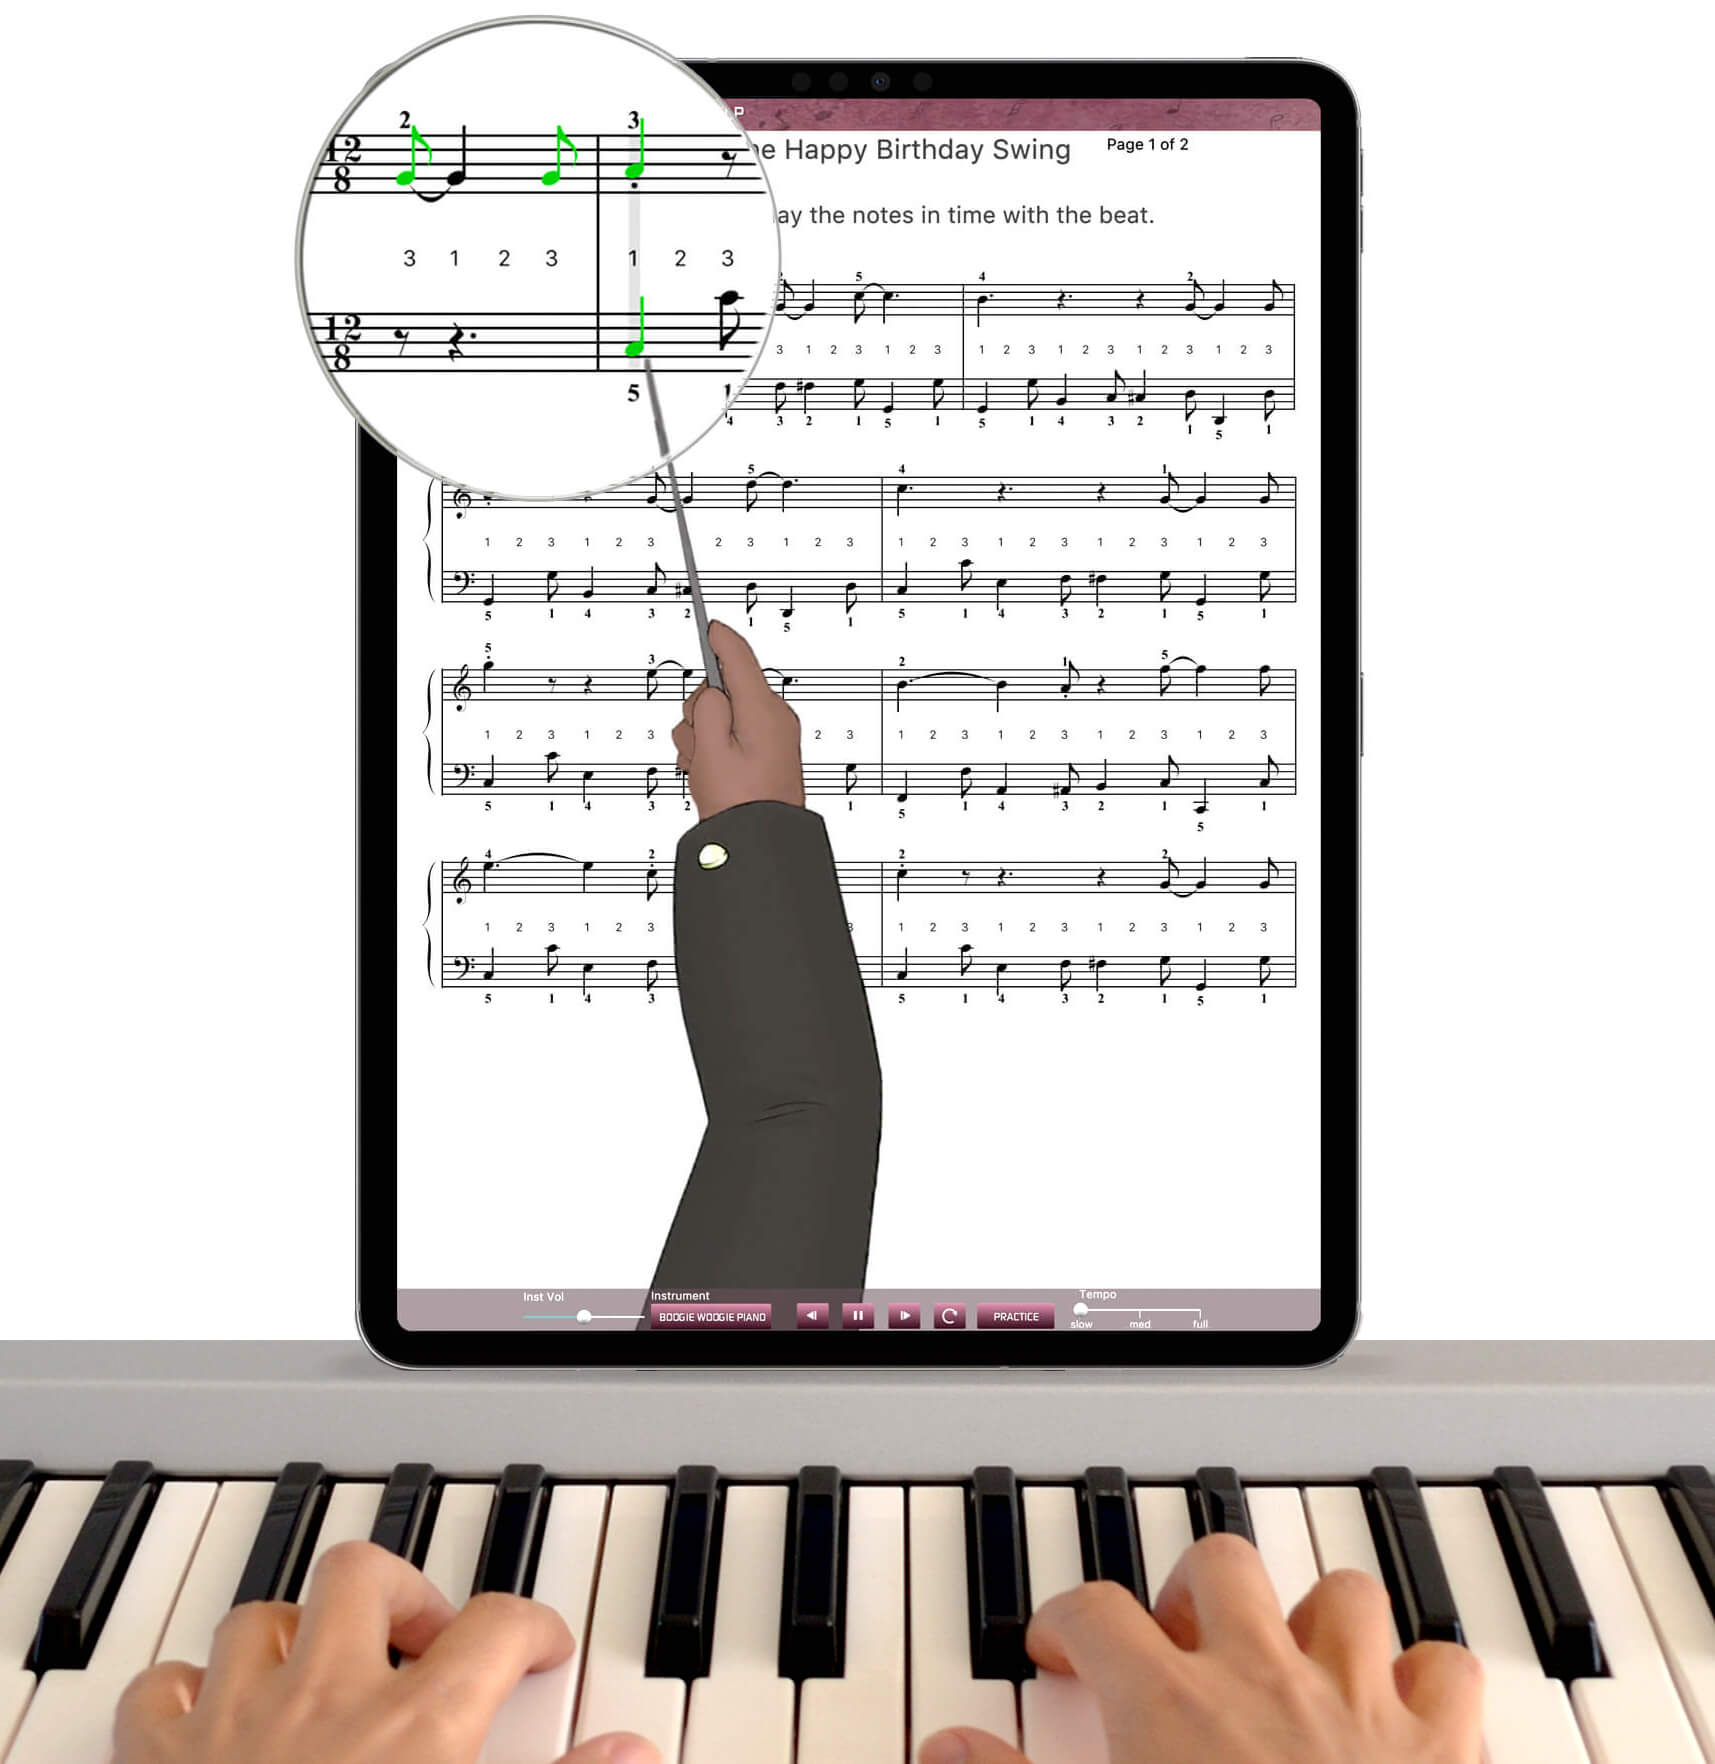 free piano lessons app on iPad with hands on piano keyboard